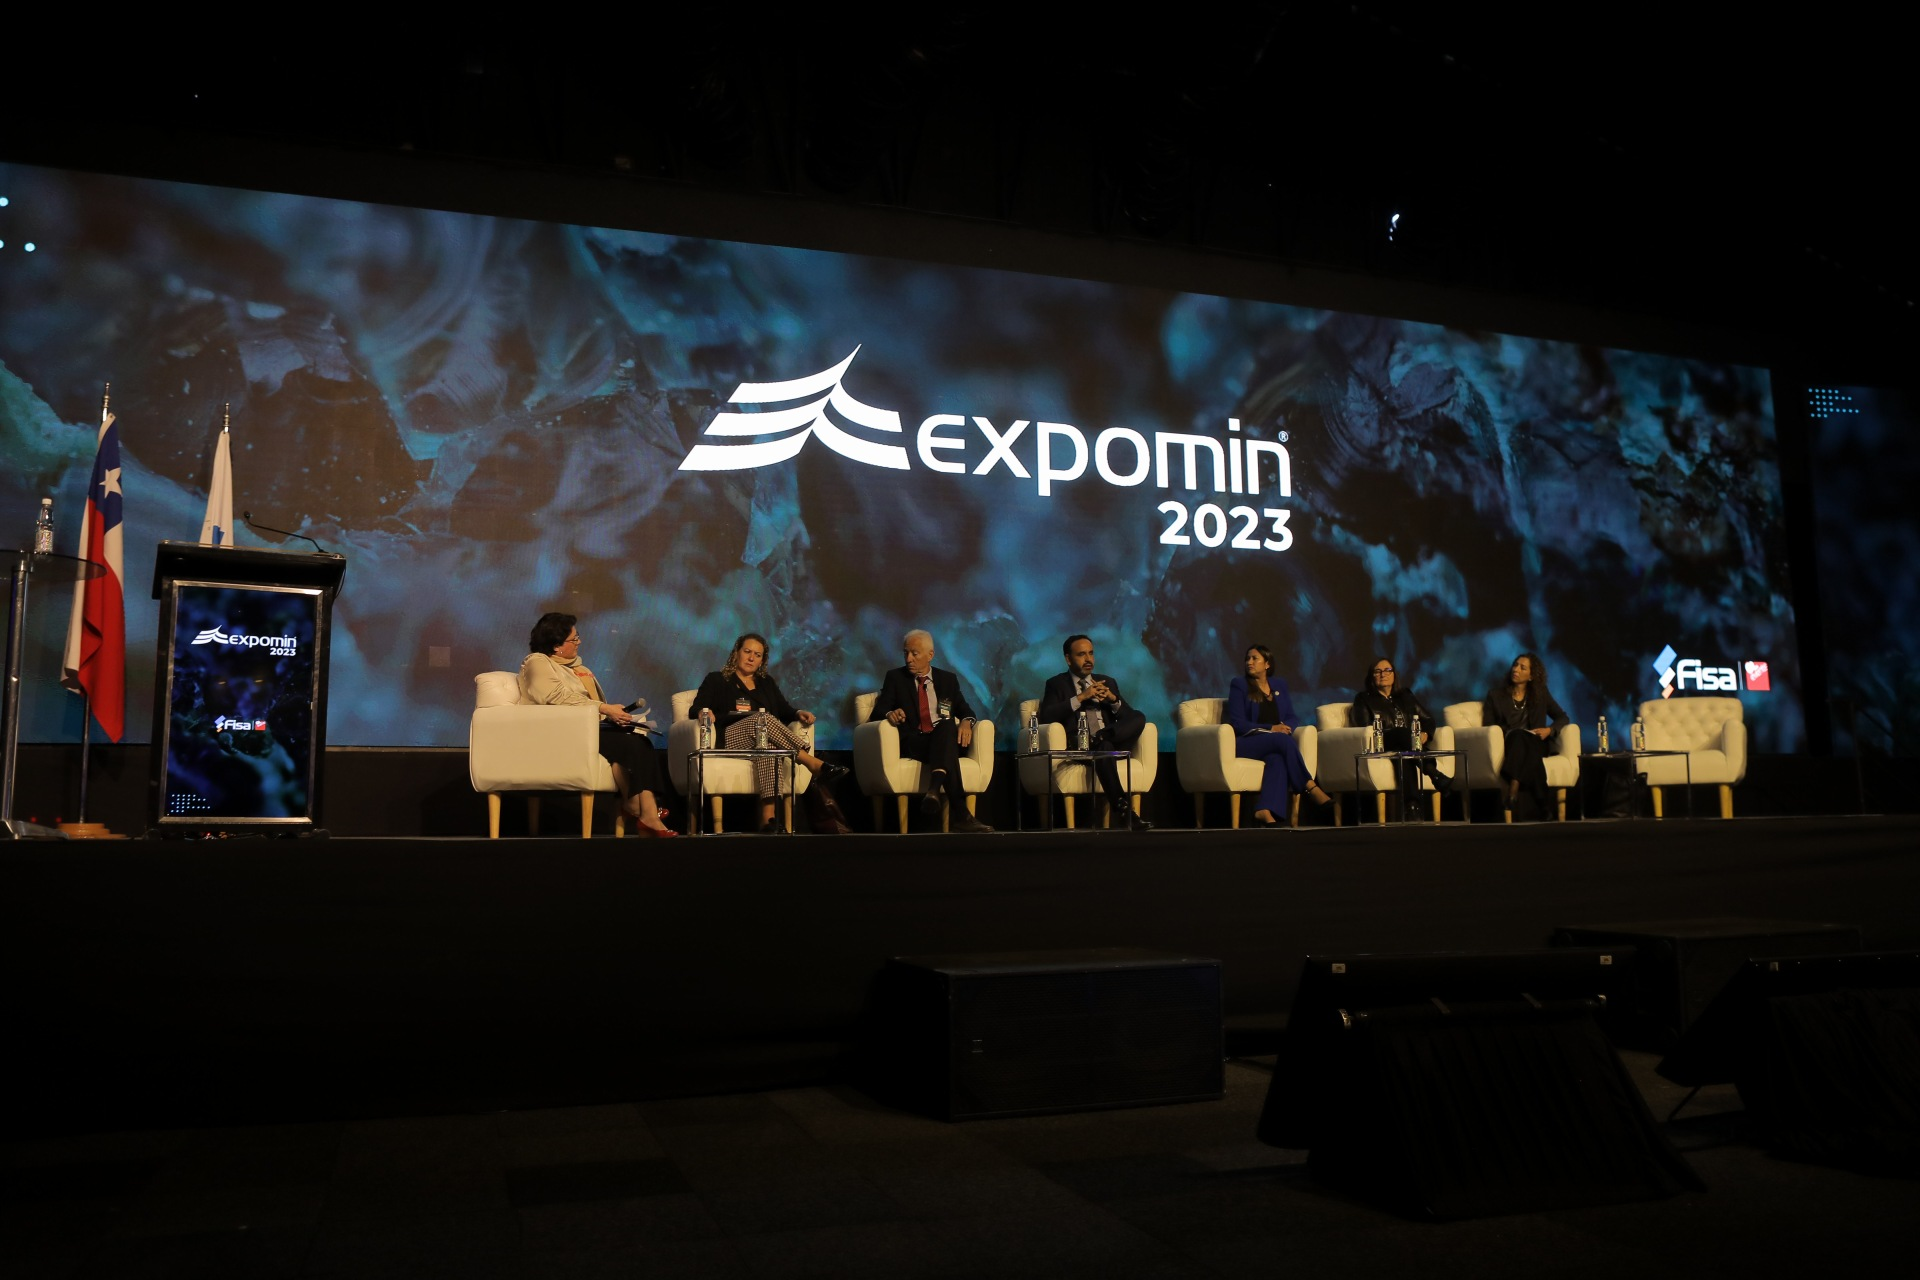 Expomin –